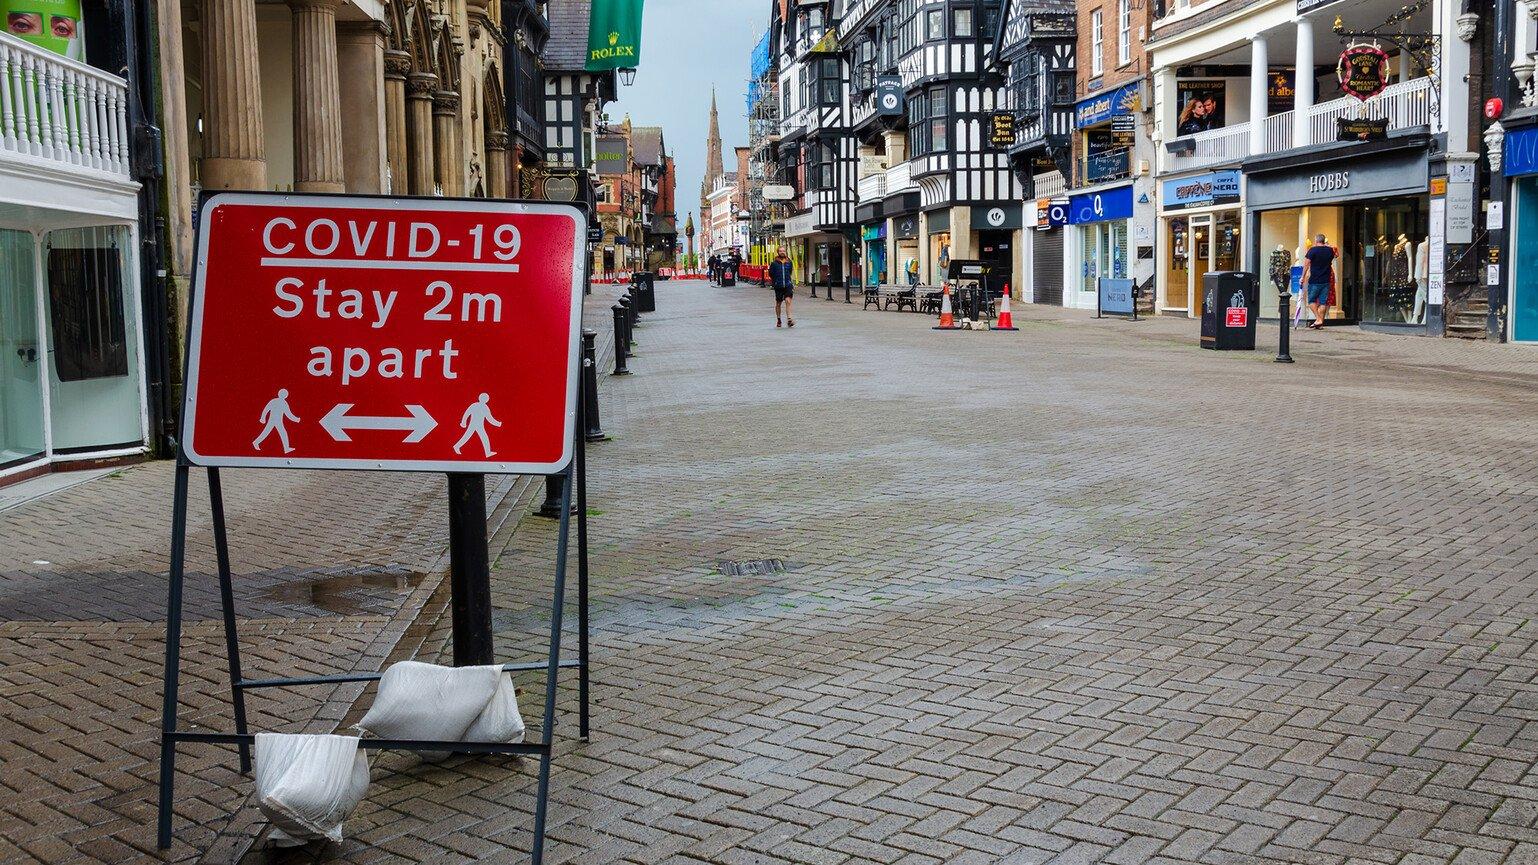 A general street scene of Chester City centre showing some traffic & pedestrian restrictions which have been put in place to allow social distancing due to Covid-19 pandemic.